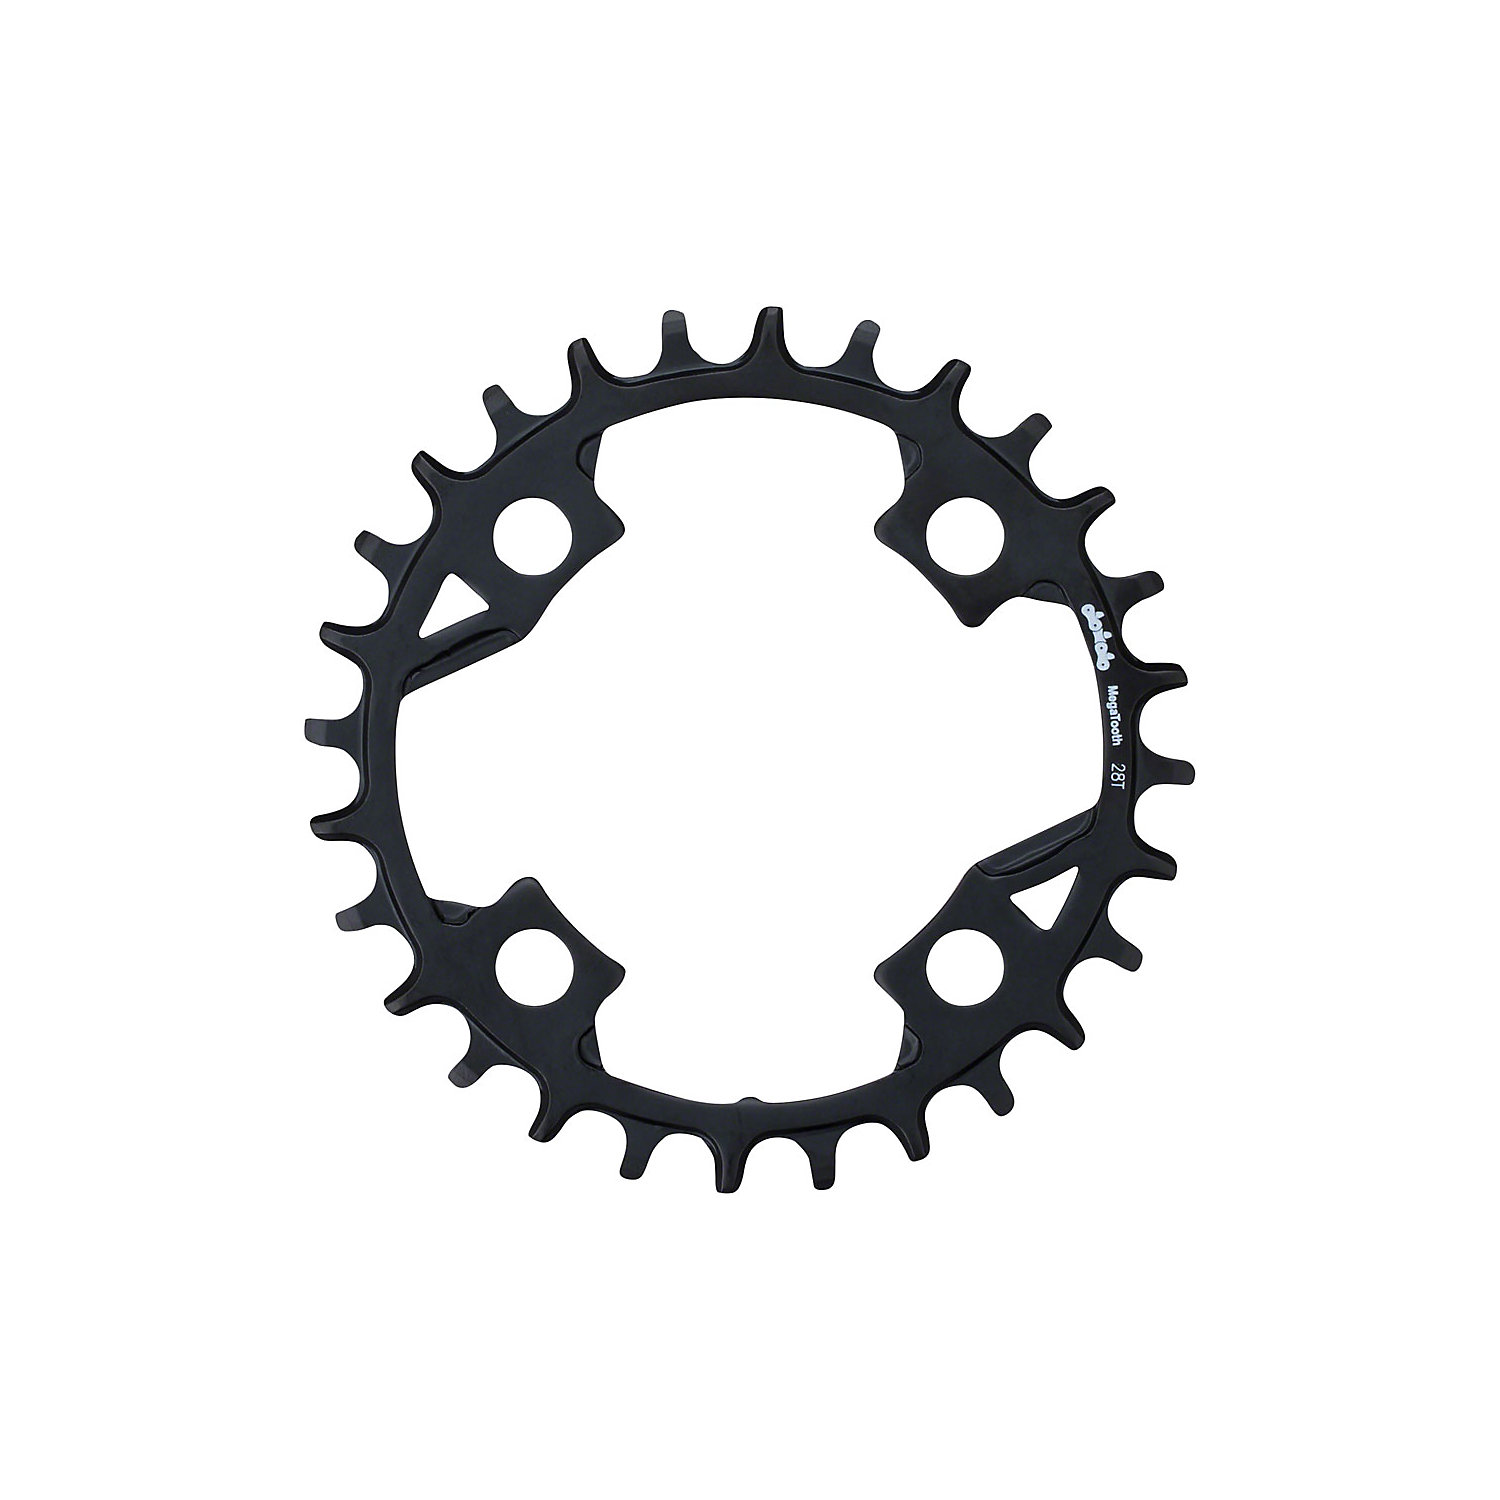 Full Speed Ahead Megatooth Chainring